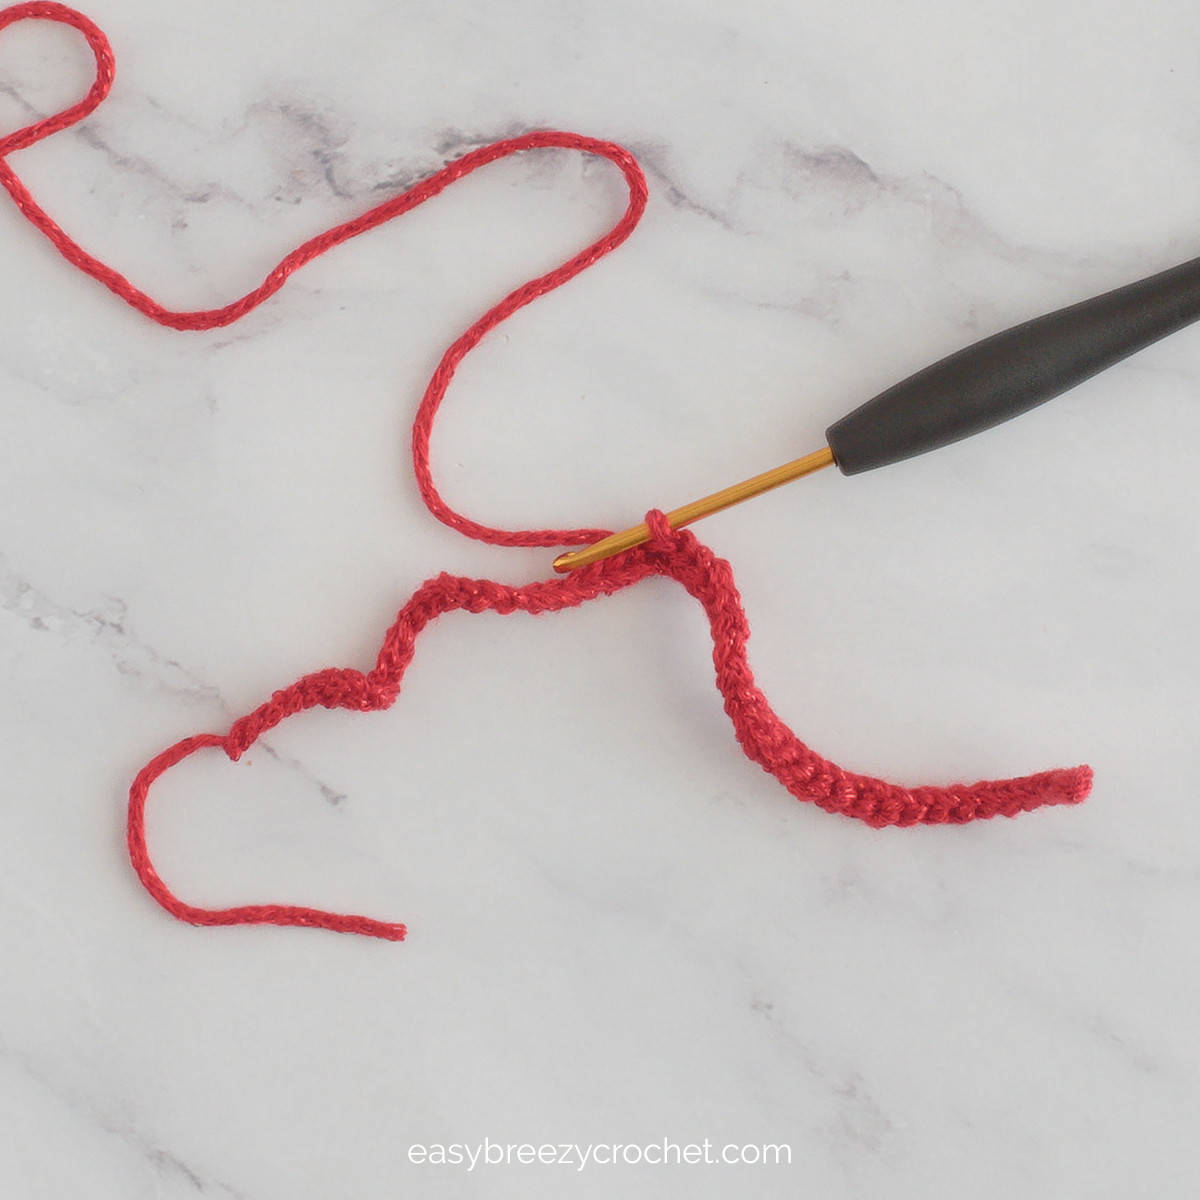 A length of crocheted red yarn to make a bow.